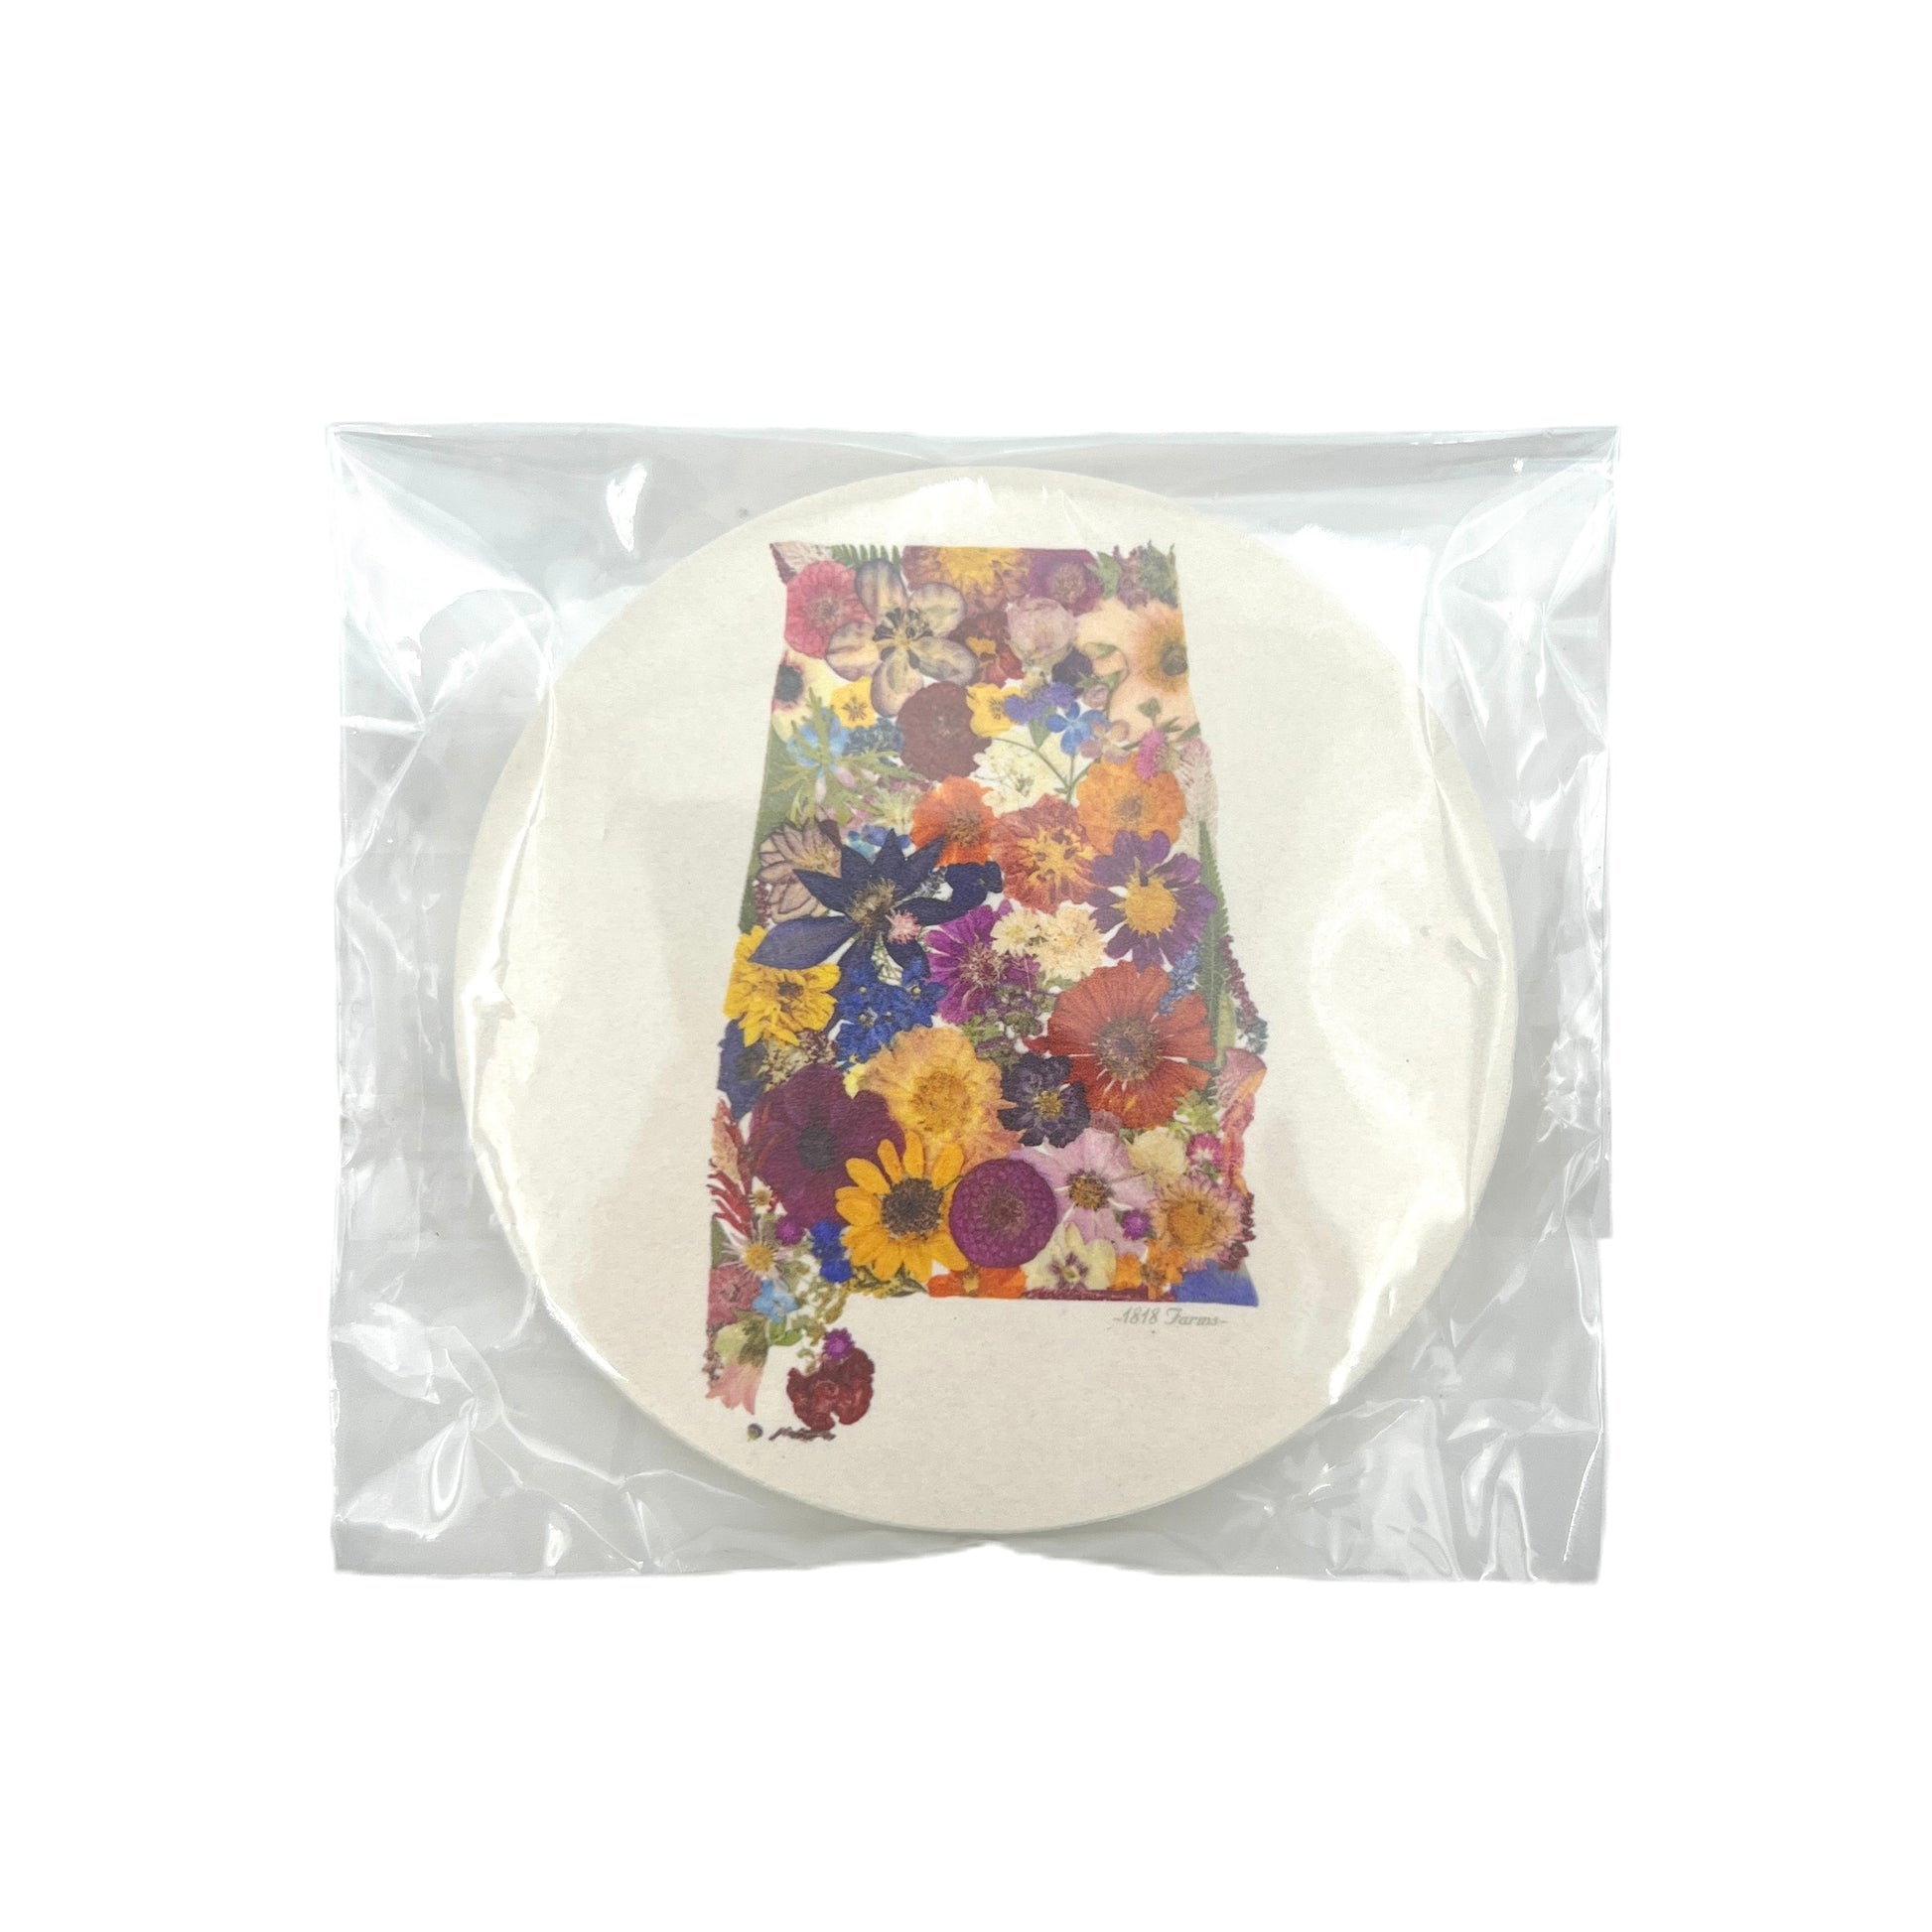 Alabama Themed Coasters (Set of 6) Featuring Dried, Pressed Flowers - "Where I Bloom" Collection Coaster 1818 Farms   